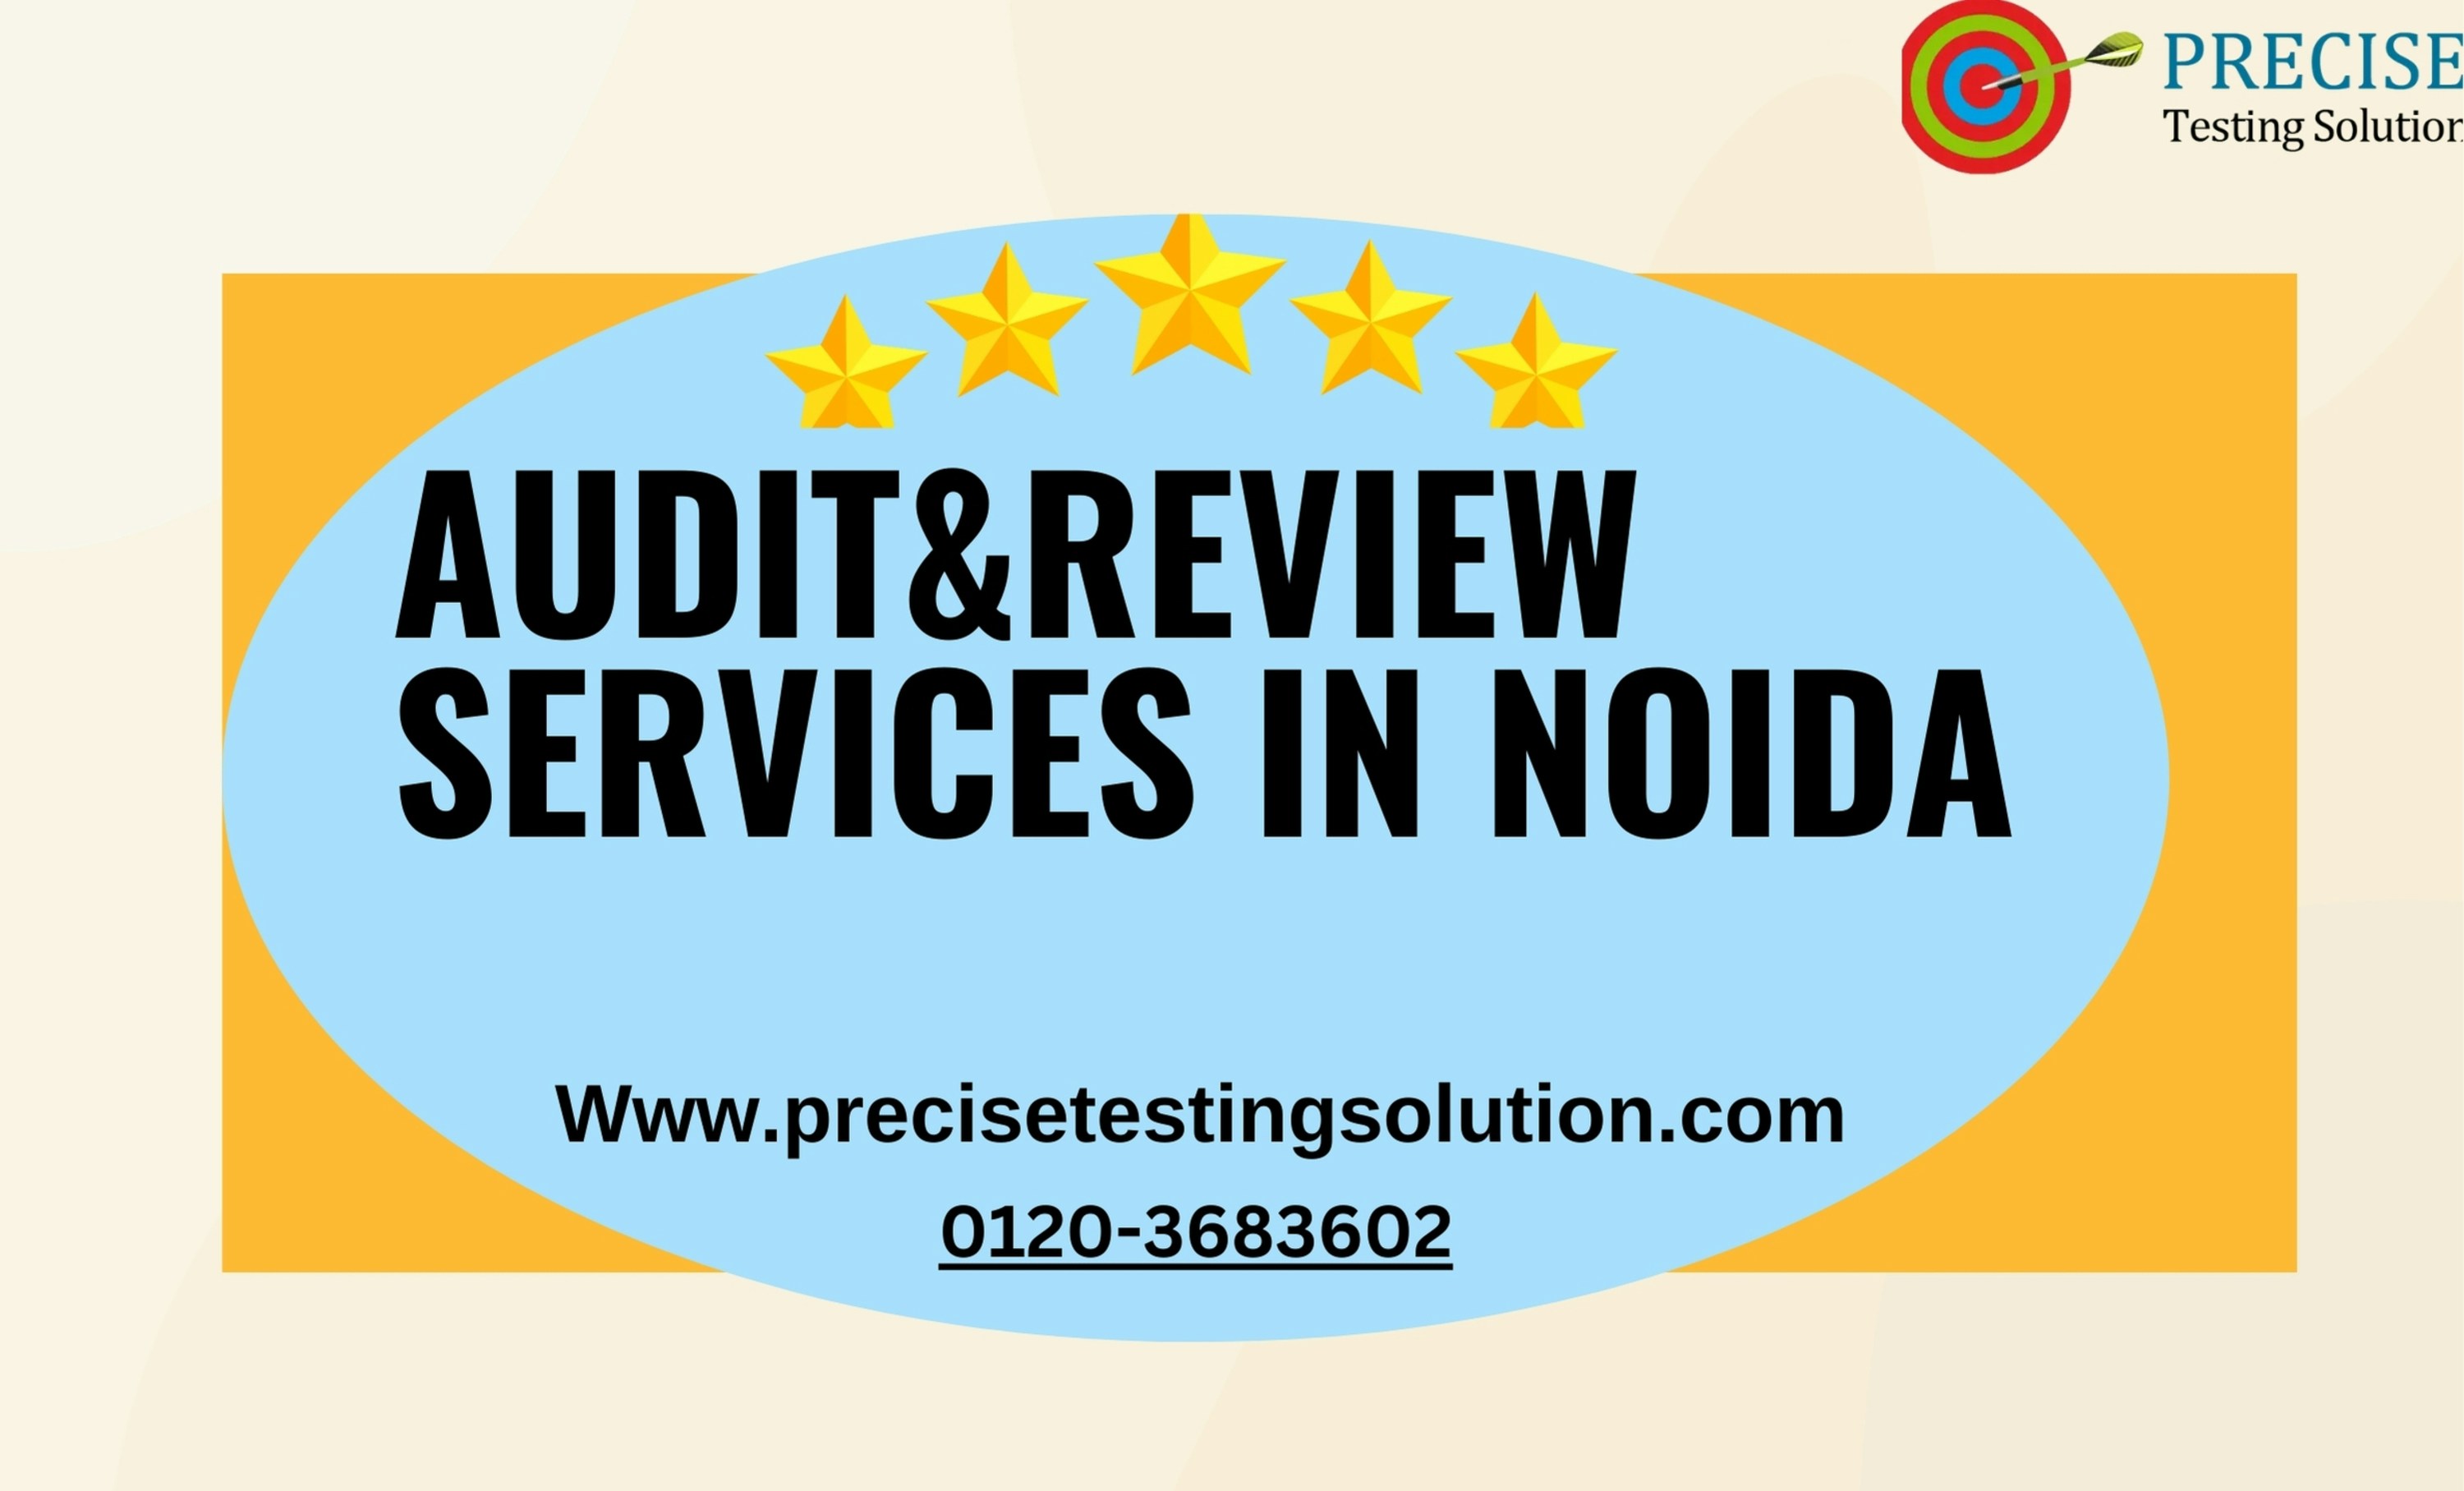 Audit & review and services in Noida